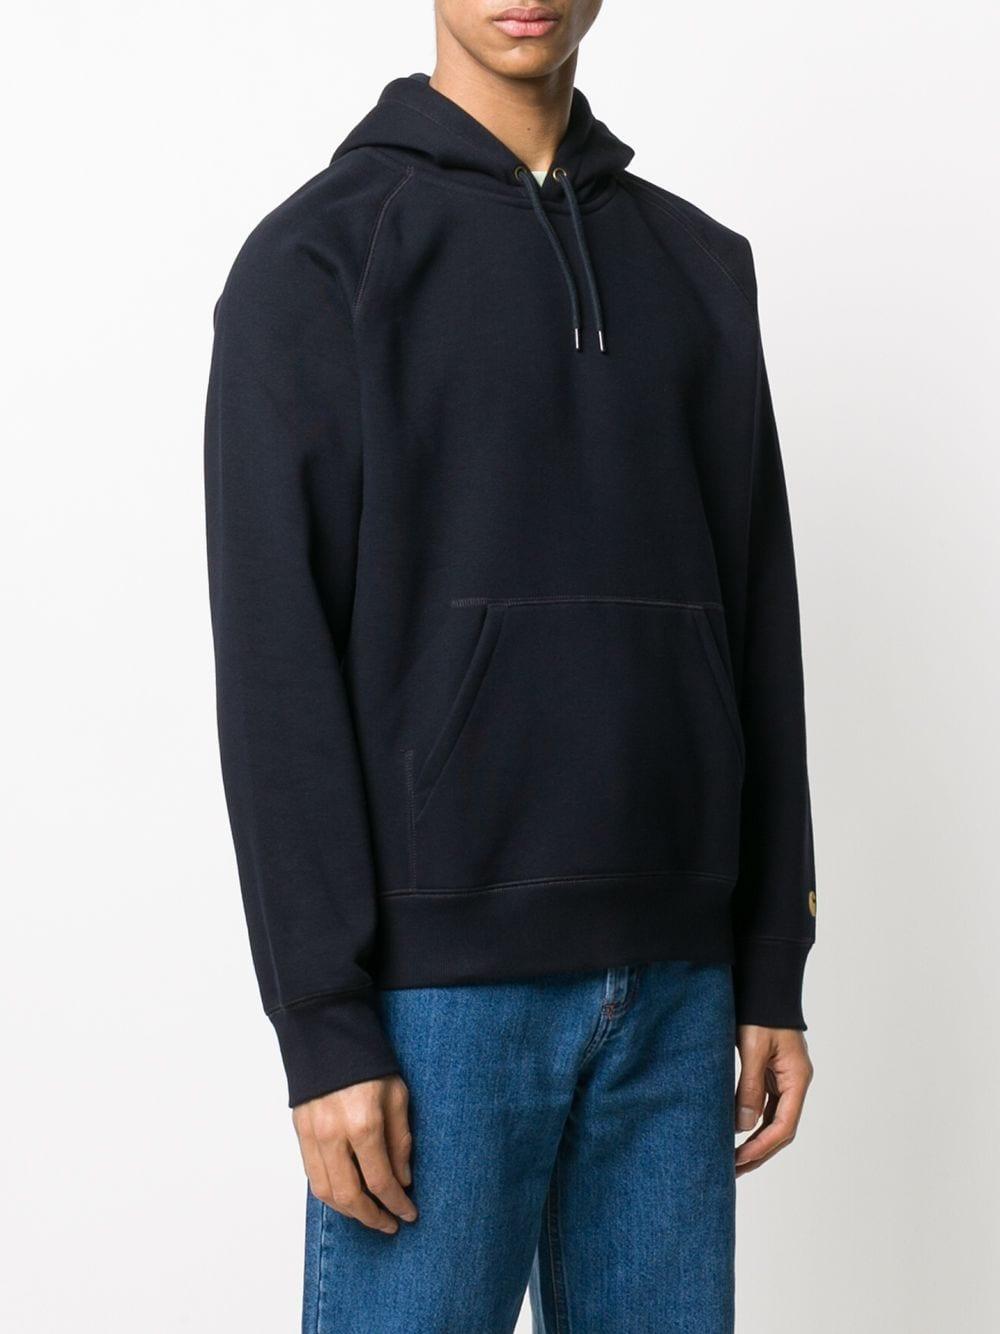 Carhartt WIP Synthetic Chase Long-sleeved Hoodie in Blue for Men - Lyst